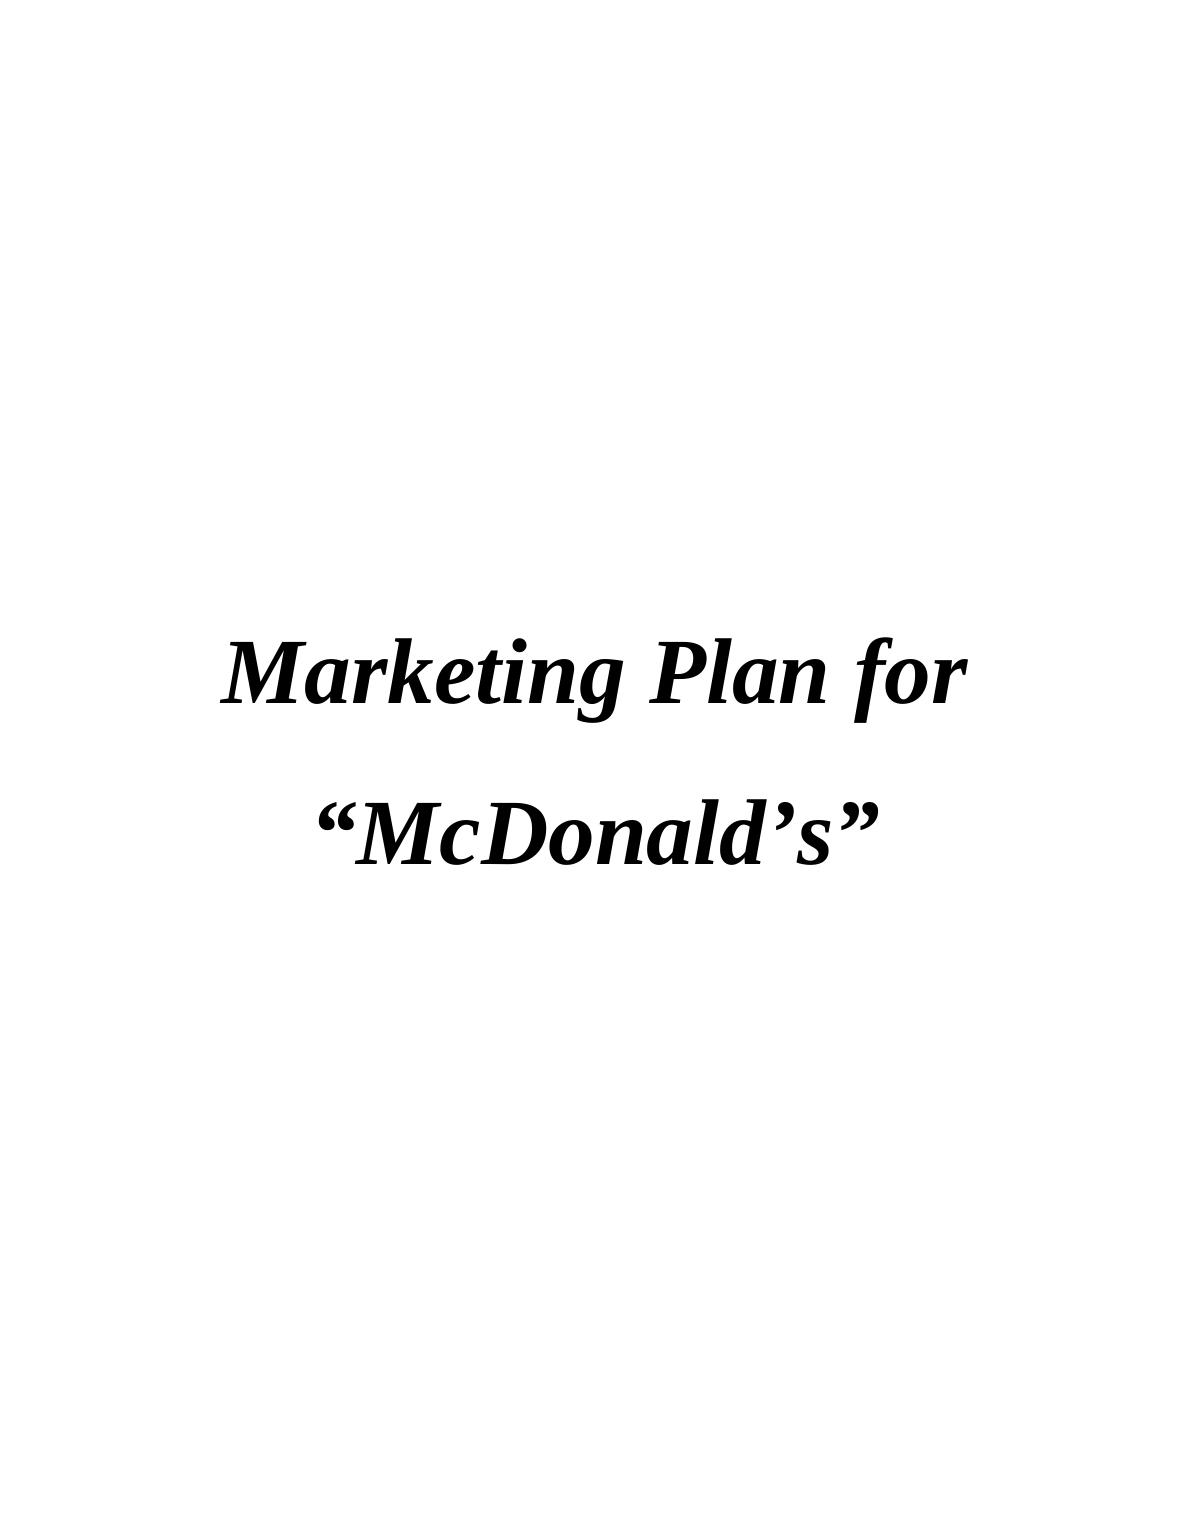 Organizational Strategy and Structure of Mcdonalds_1